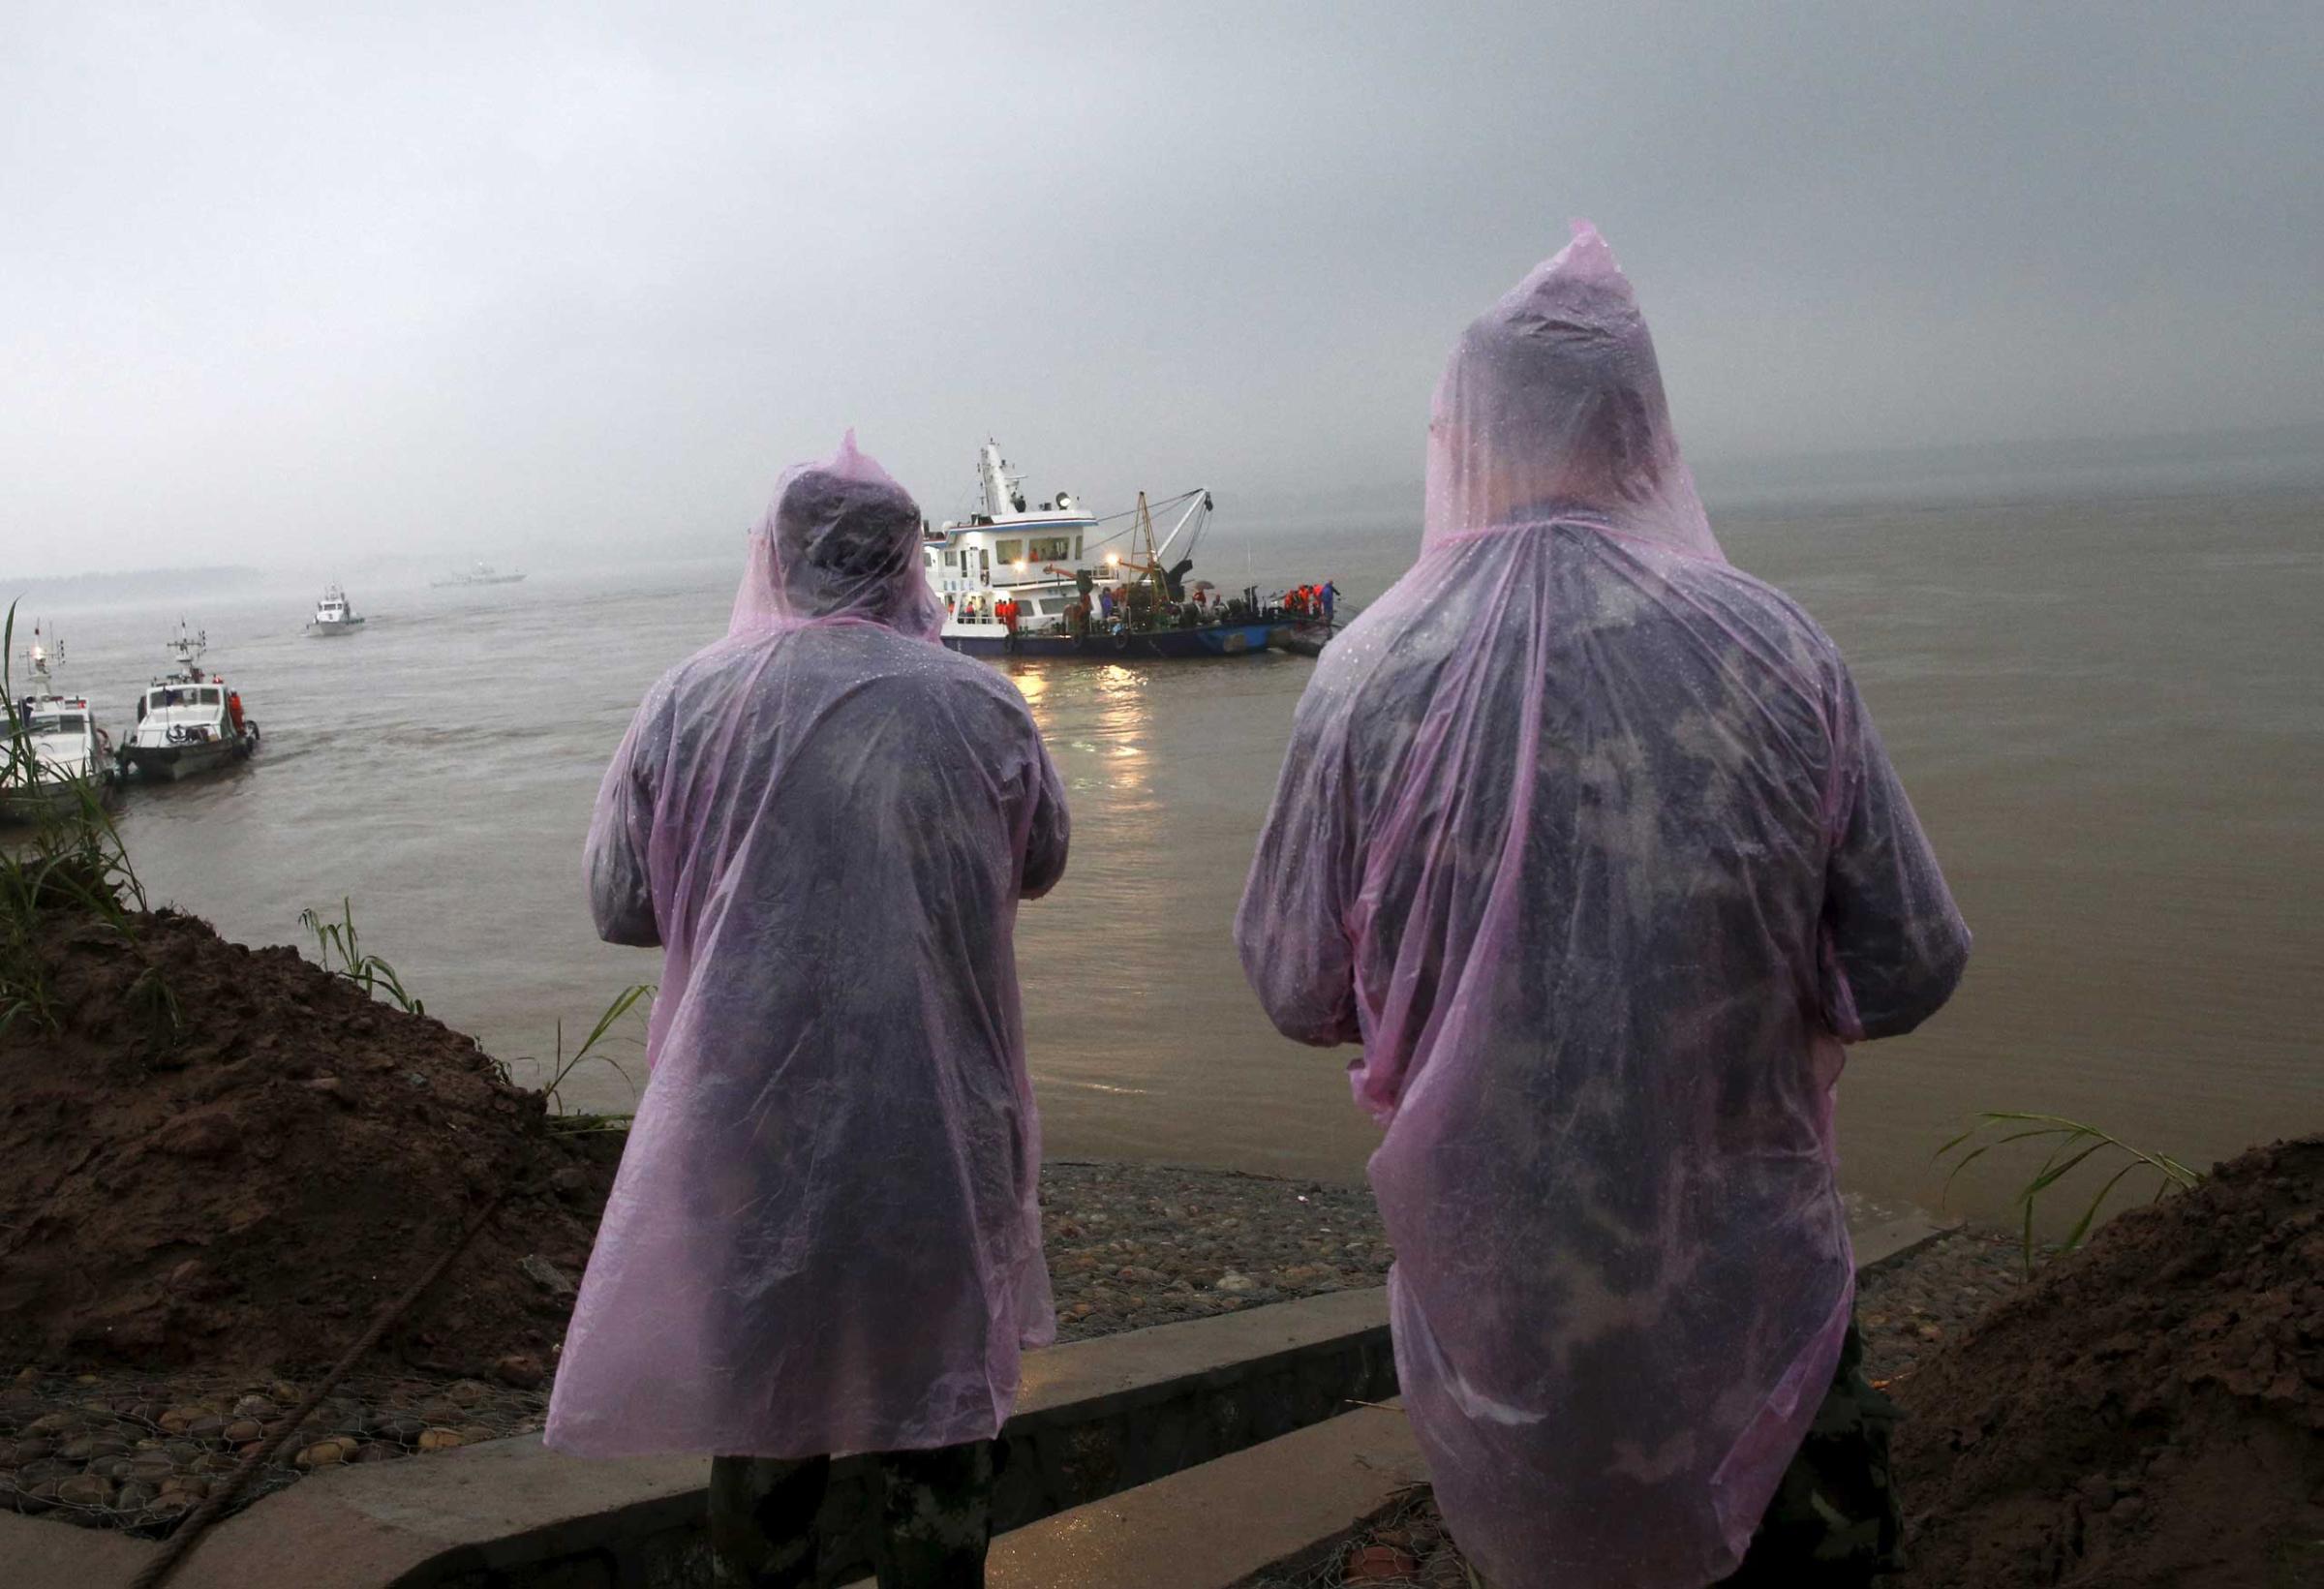 Paramilitary soldiers in raincoats watch a sunken ship and rescue ship in the Jianli section of Yangtze River, Hubei province, China on June 2, 2015.